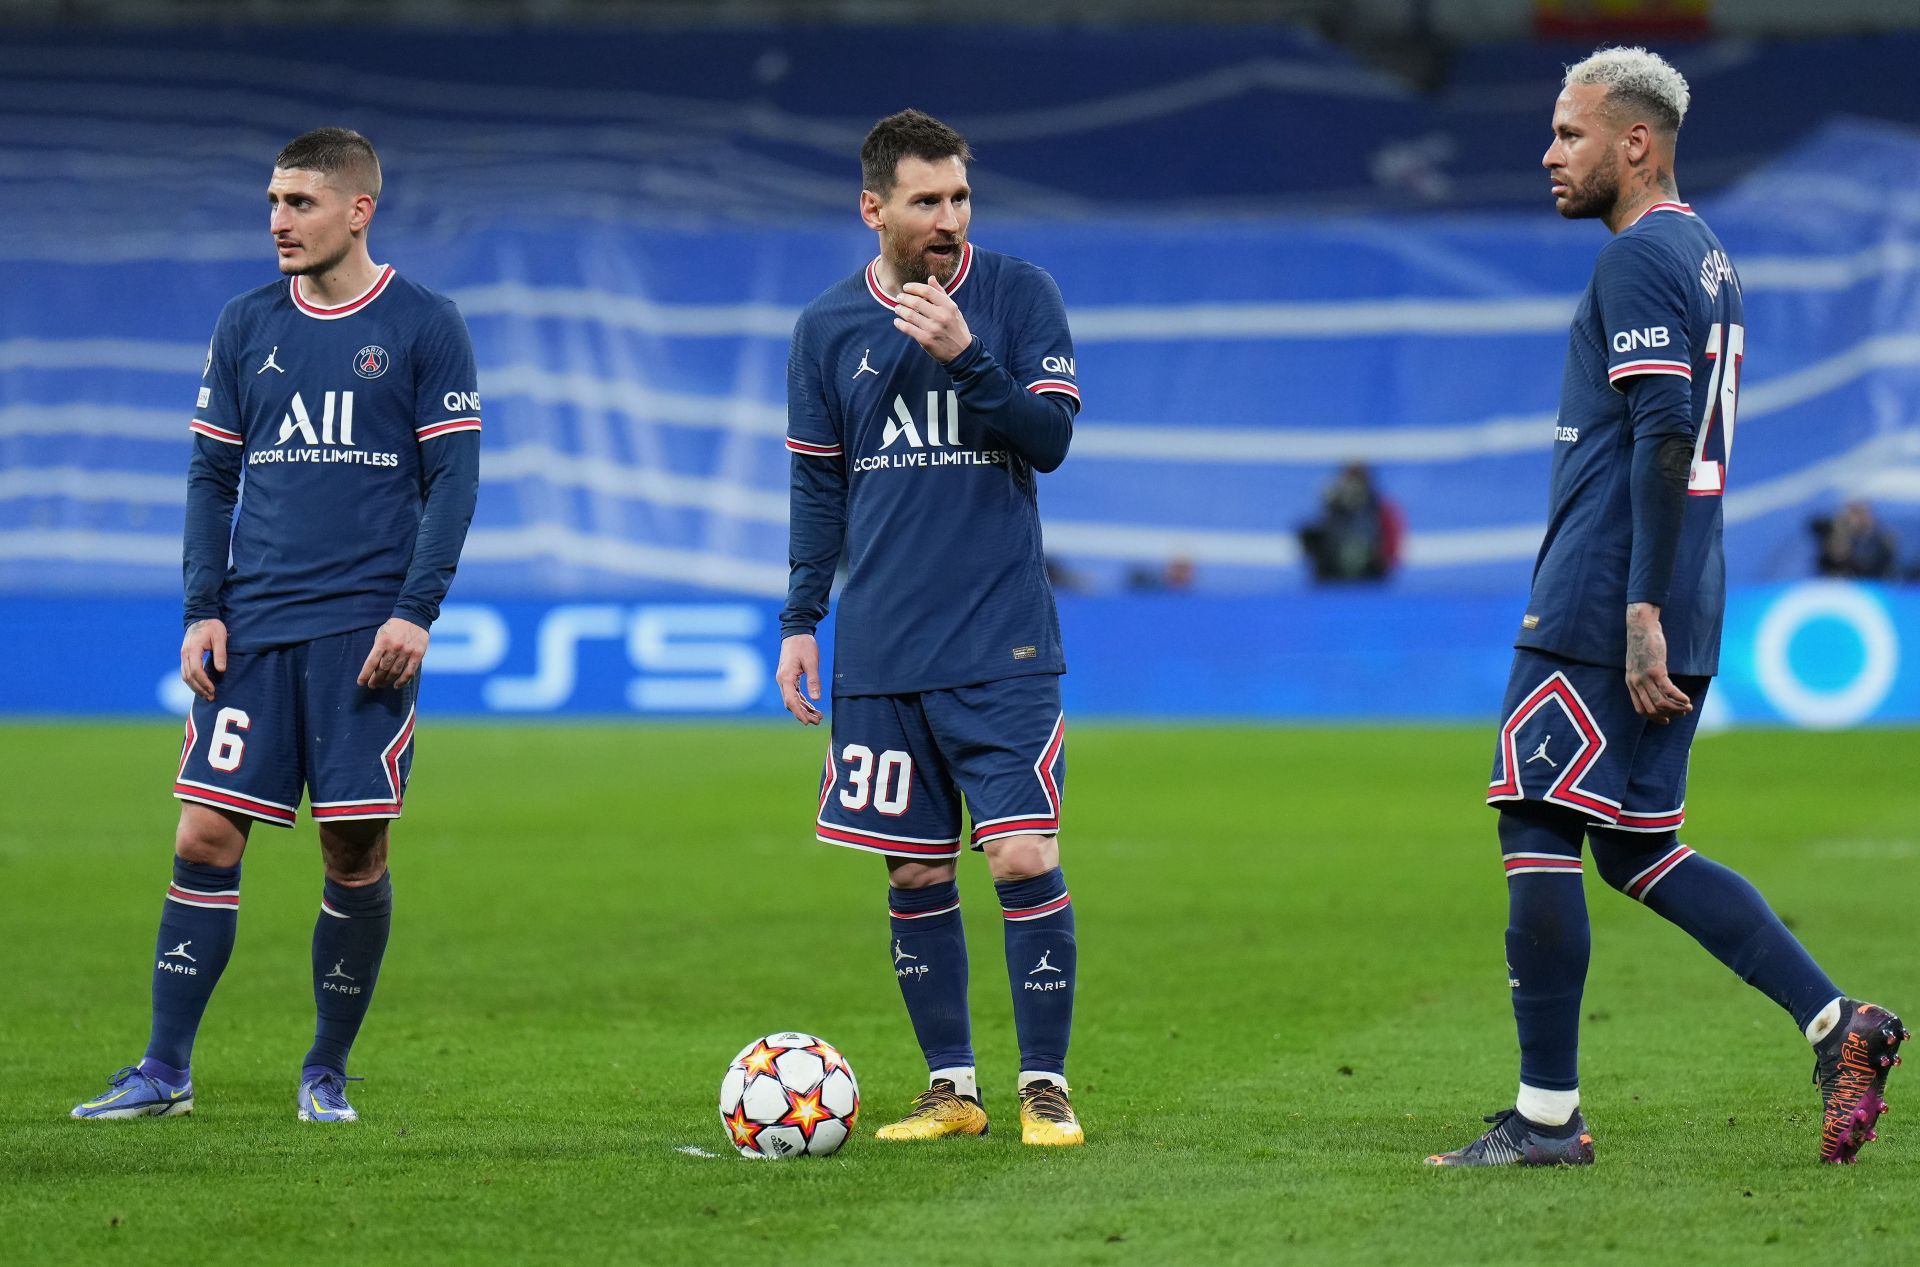 PSG and Lionel Messi (#30) are still smarting from their UCL elimination against Real Madrid.